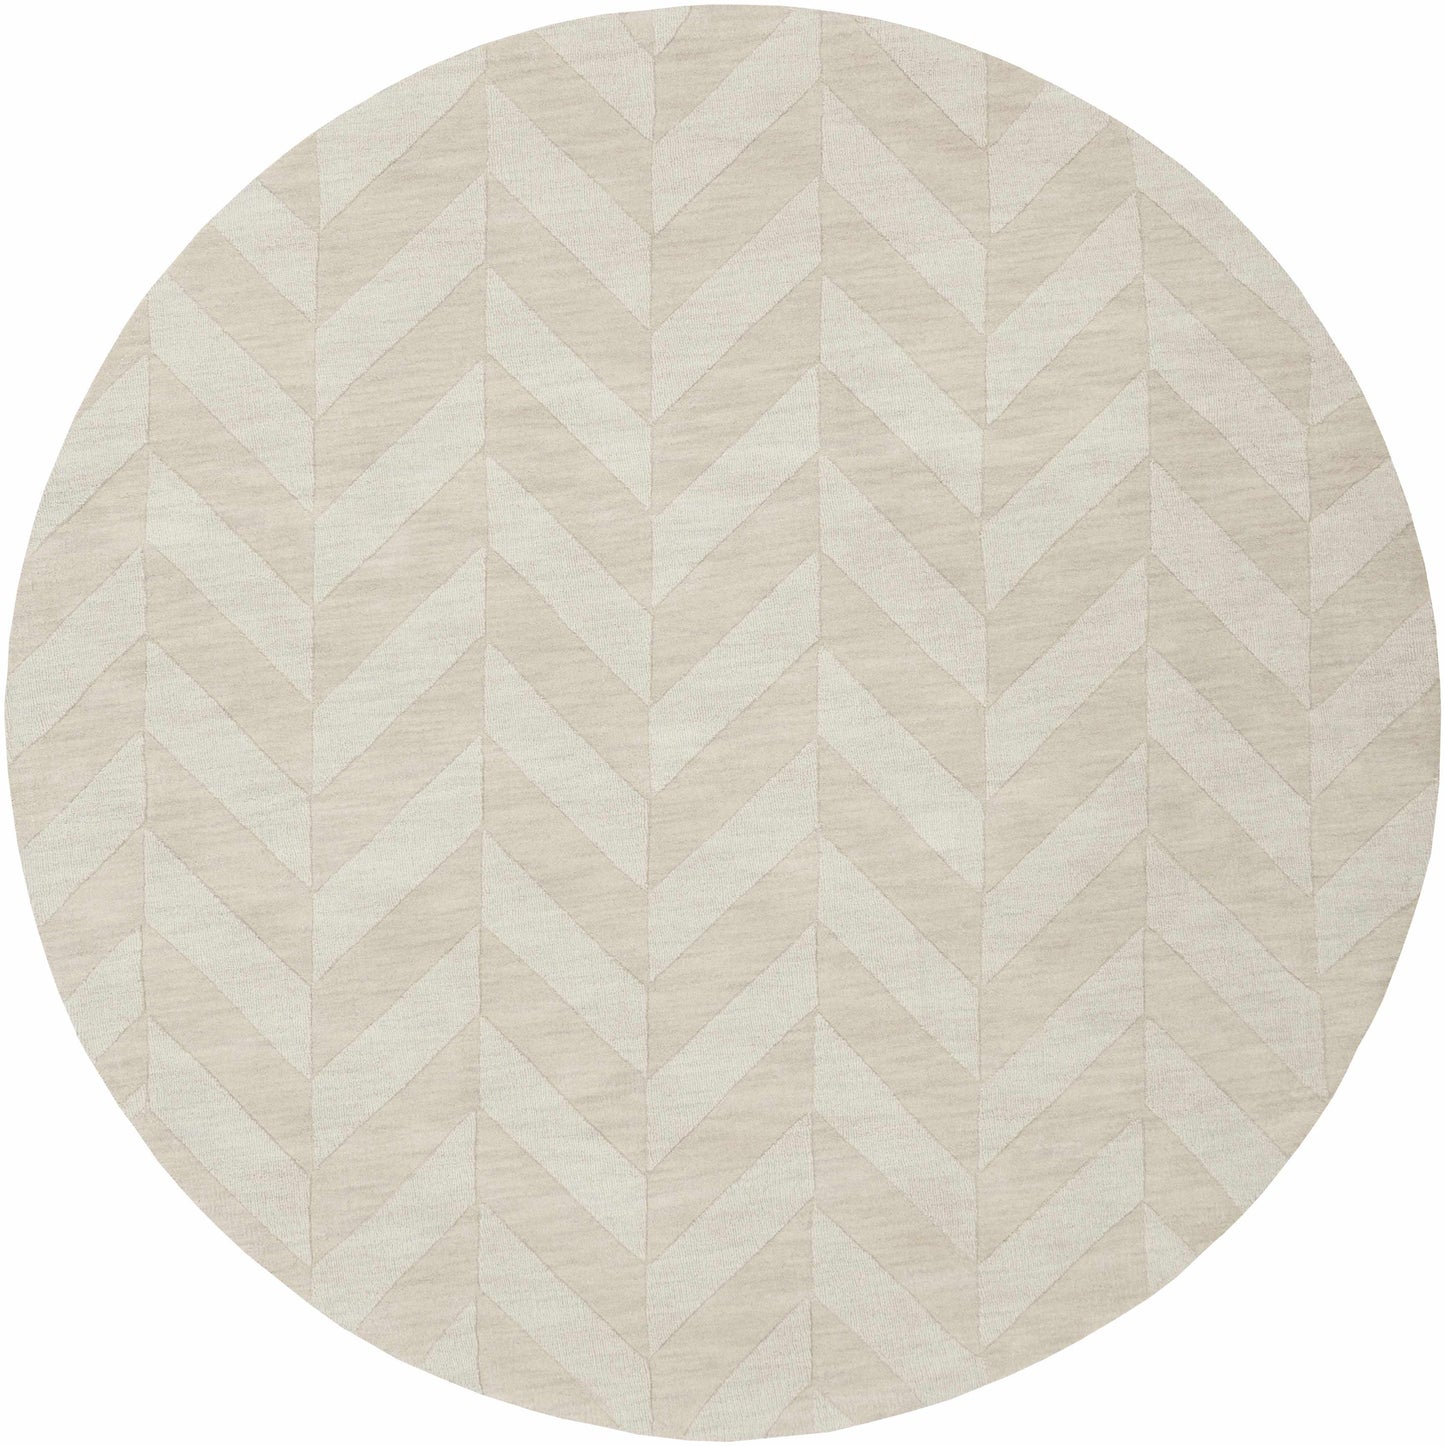 Boutique Rugs Rugs 7'9" Round Normalville Area Rug